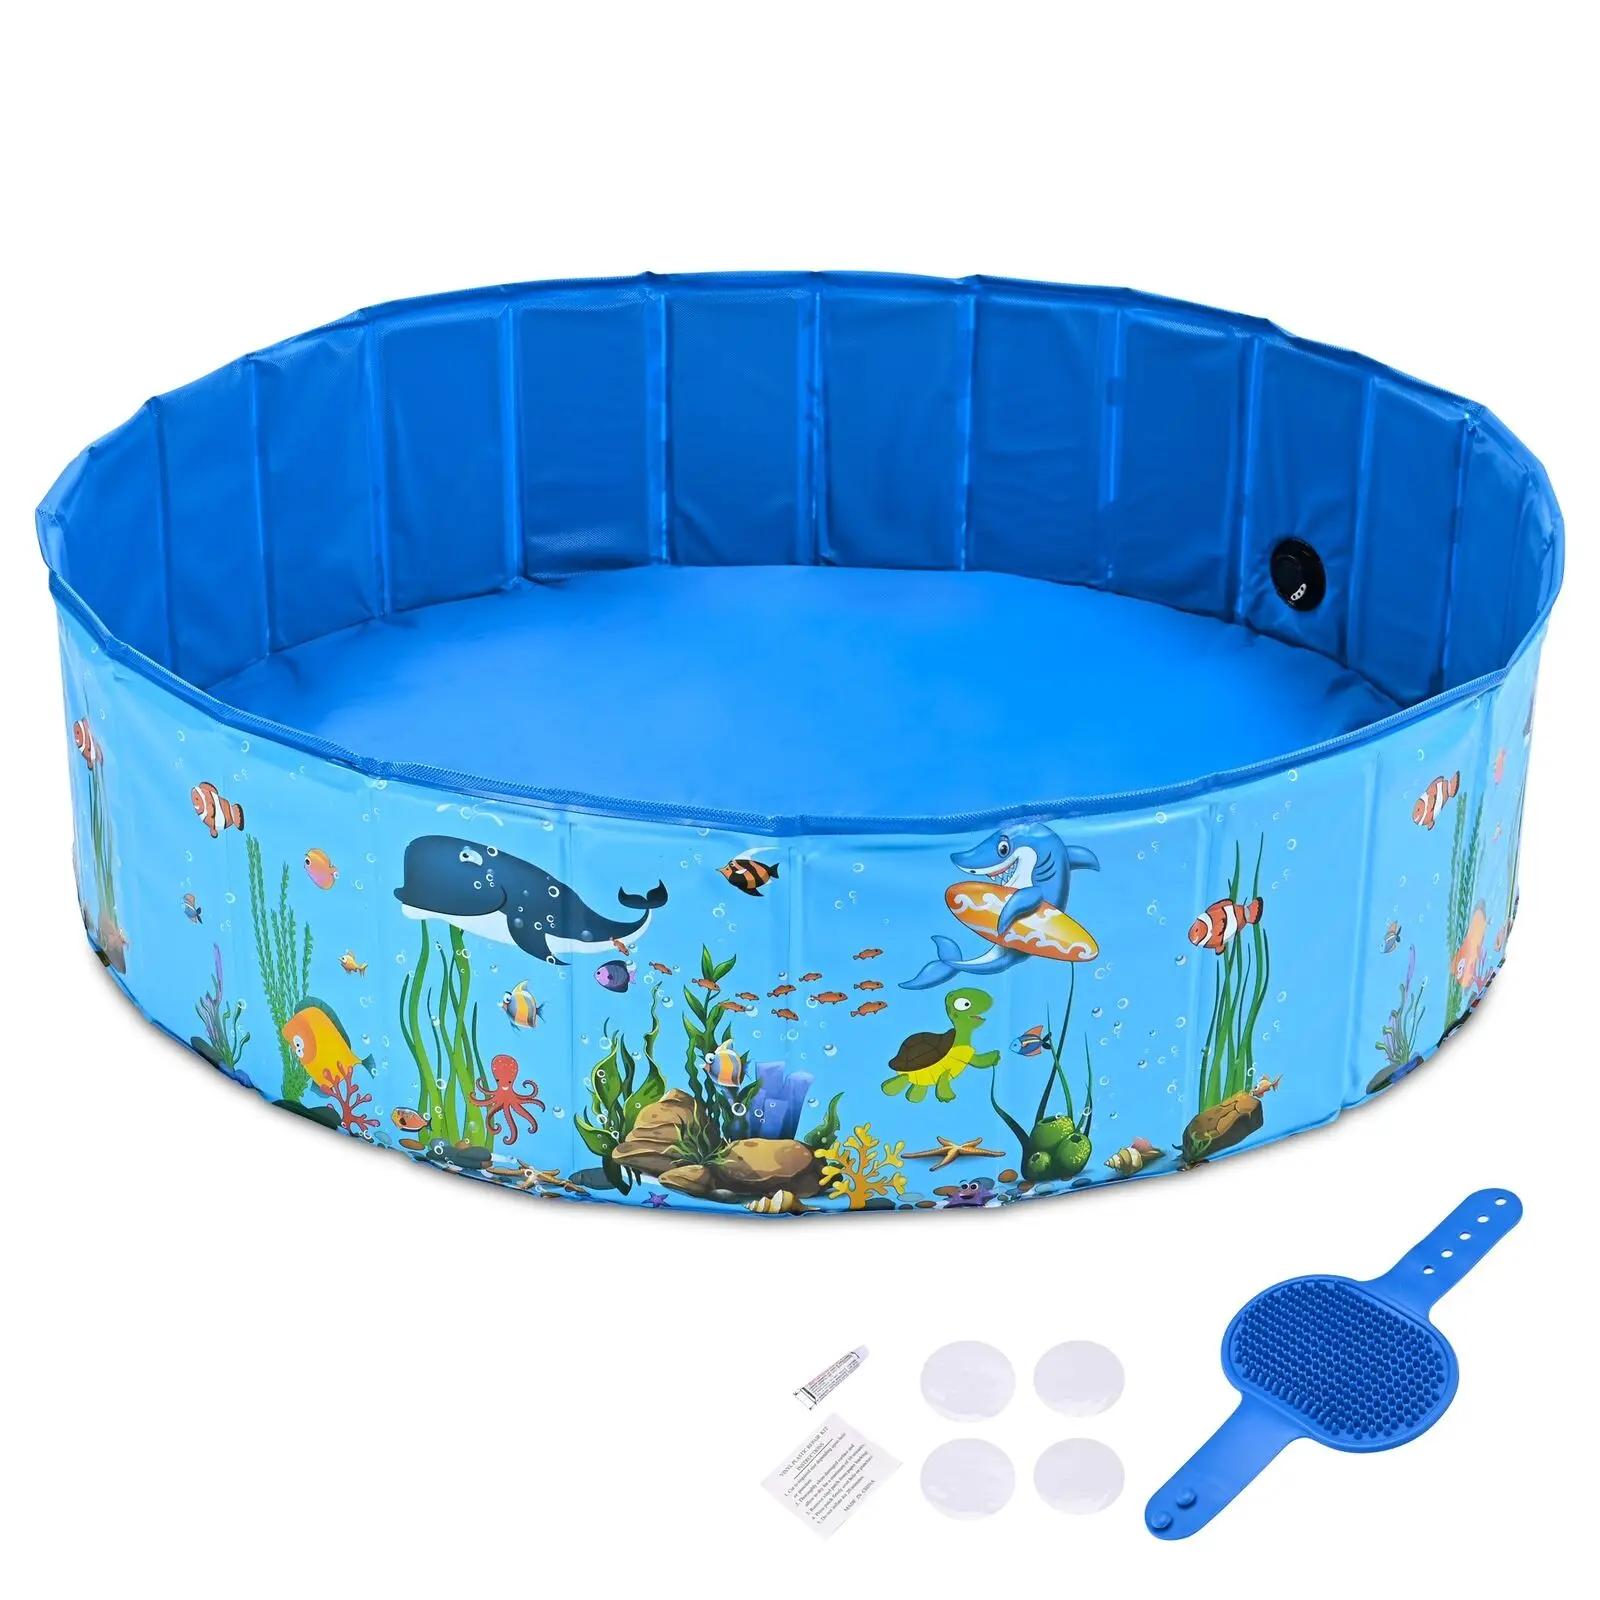 Pet Swimming Pool Features Folding Structure for Great Portability 120 X 30 CM